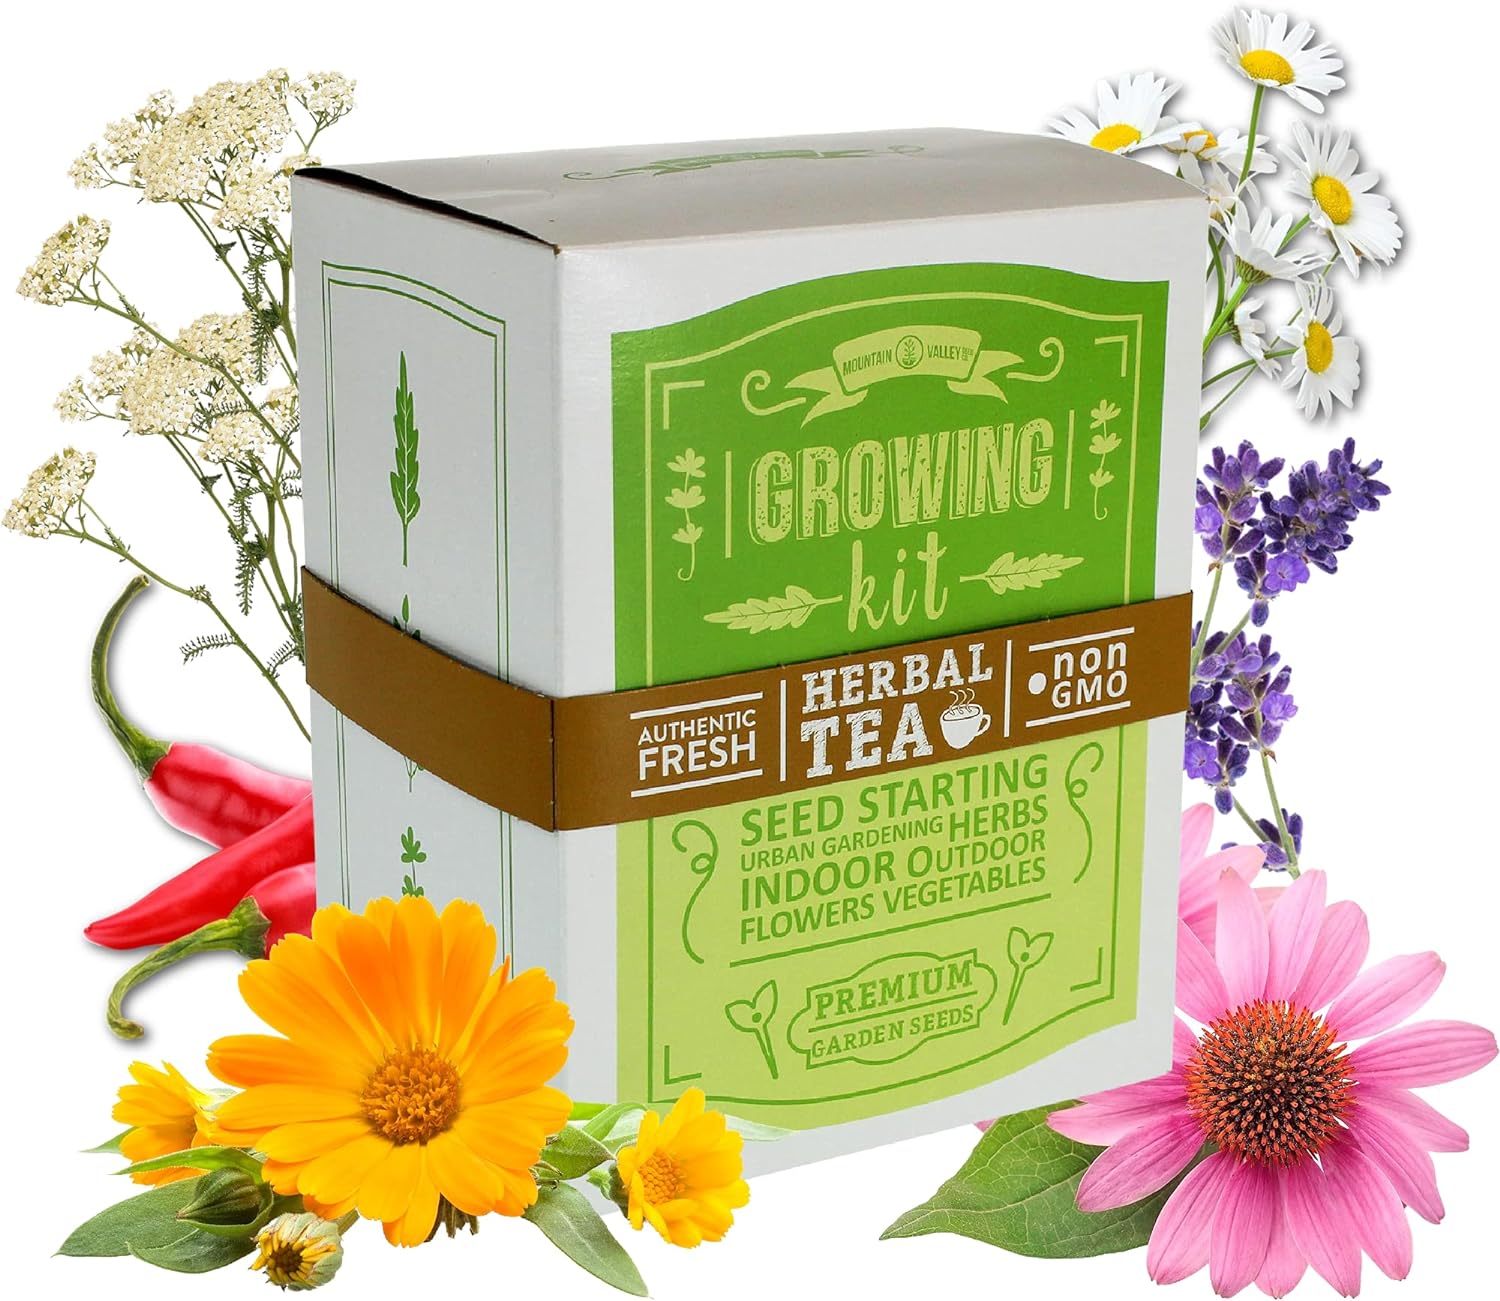 Medicinal  Herbal Tea Indoor Herb Garden Starter Kit - Basic Herb Seeds for Planting - 6 Non-GMO Varieties - Seeds Include Hot Pepper, Yarrow, Echinacea, Calendula, Chamomile, and Lavender